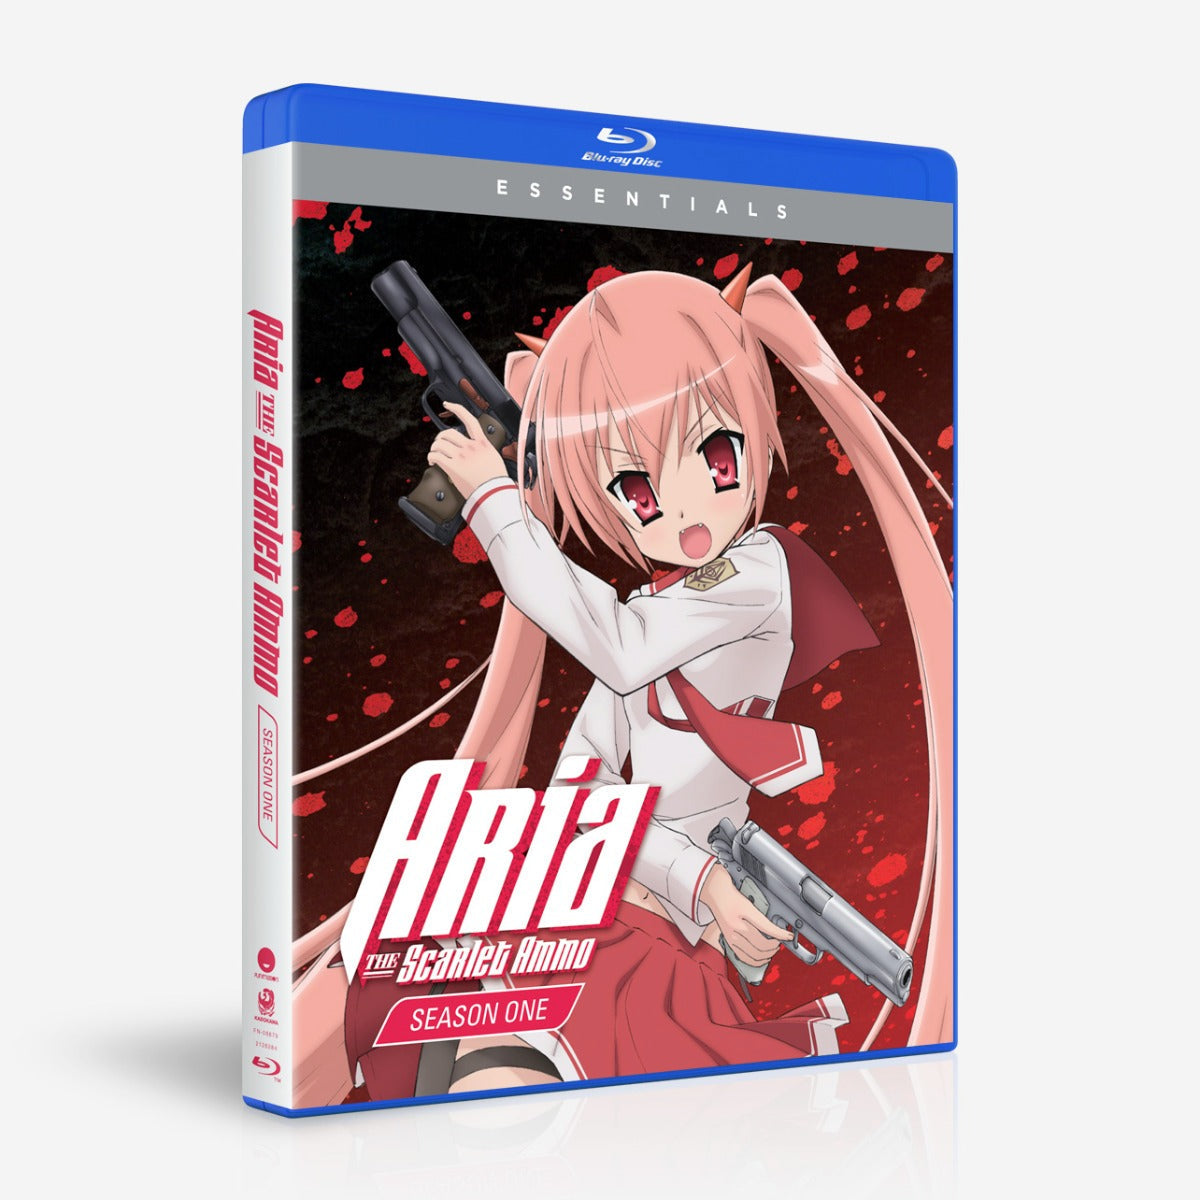 Aria the Scarlet Ammo - Season 1 - Essentials - Blu-ray image count 0